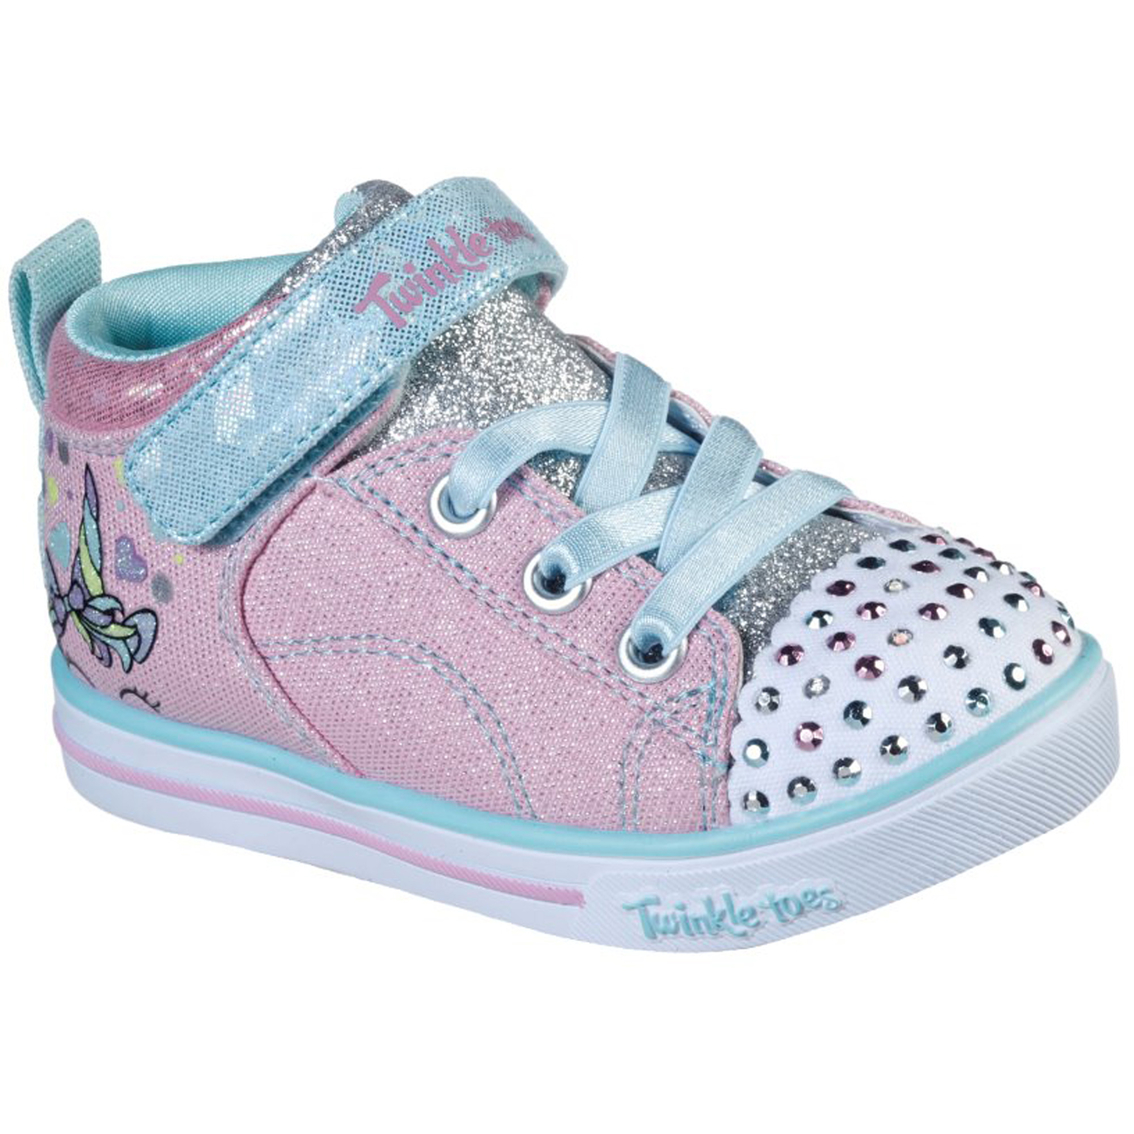 sparkly sneakers for toddlers